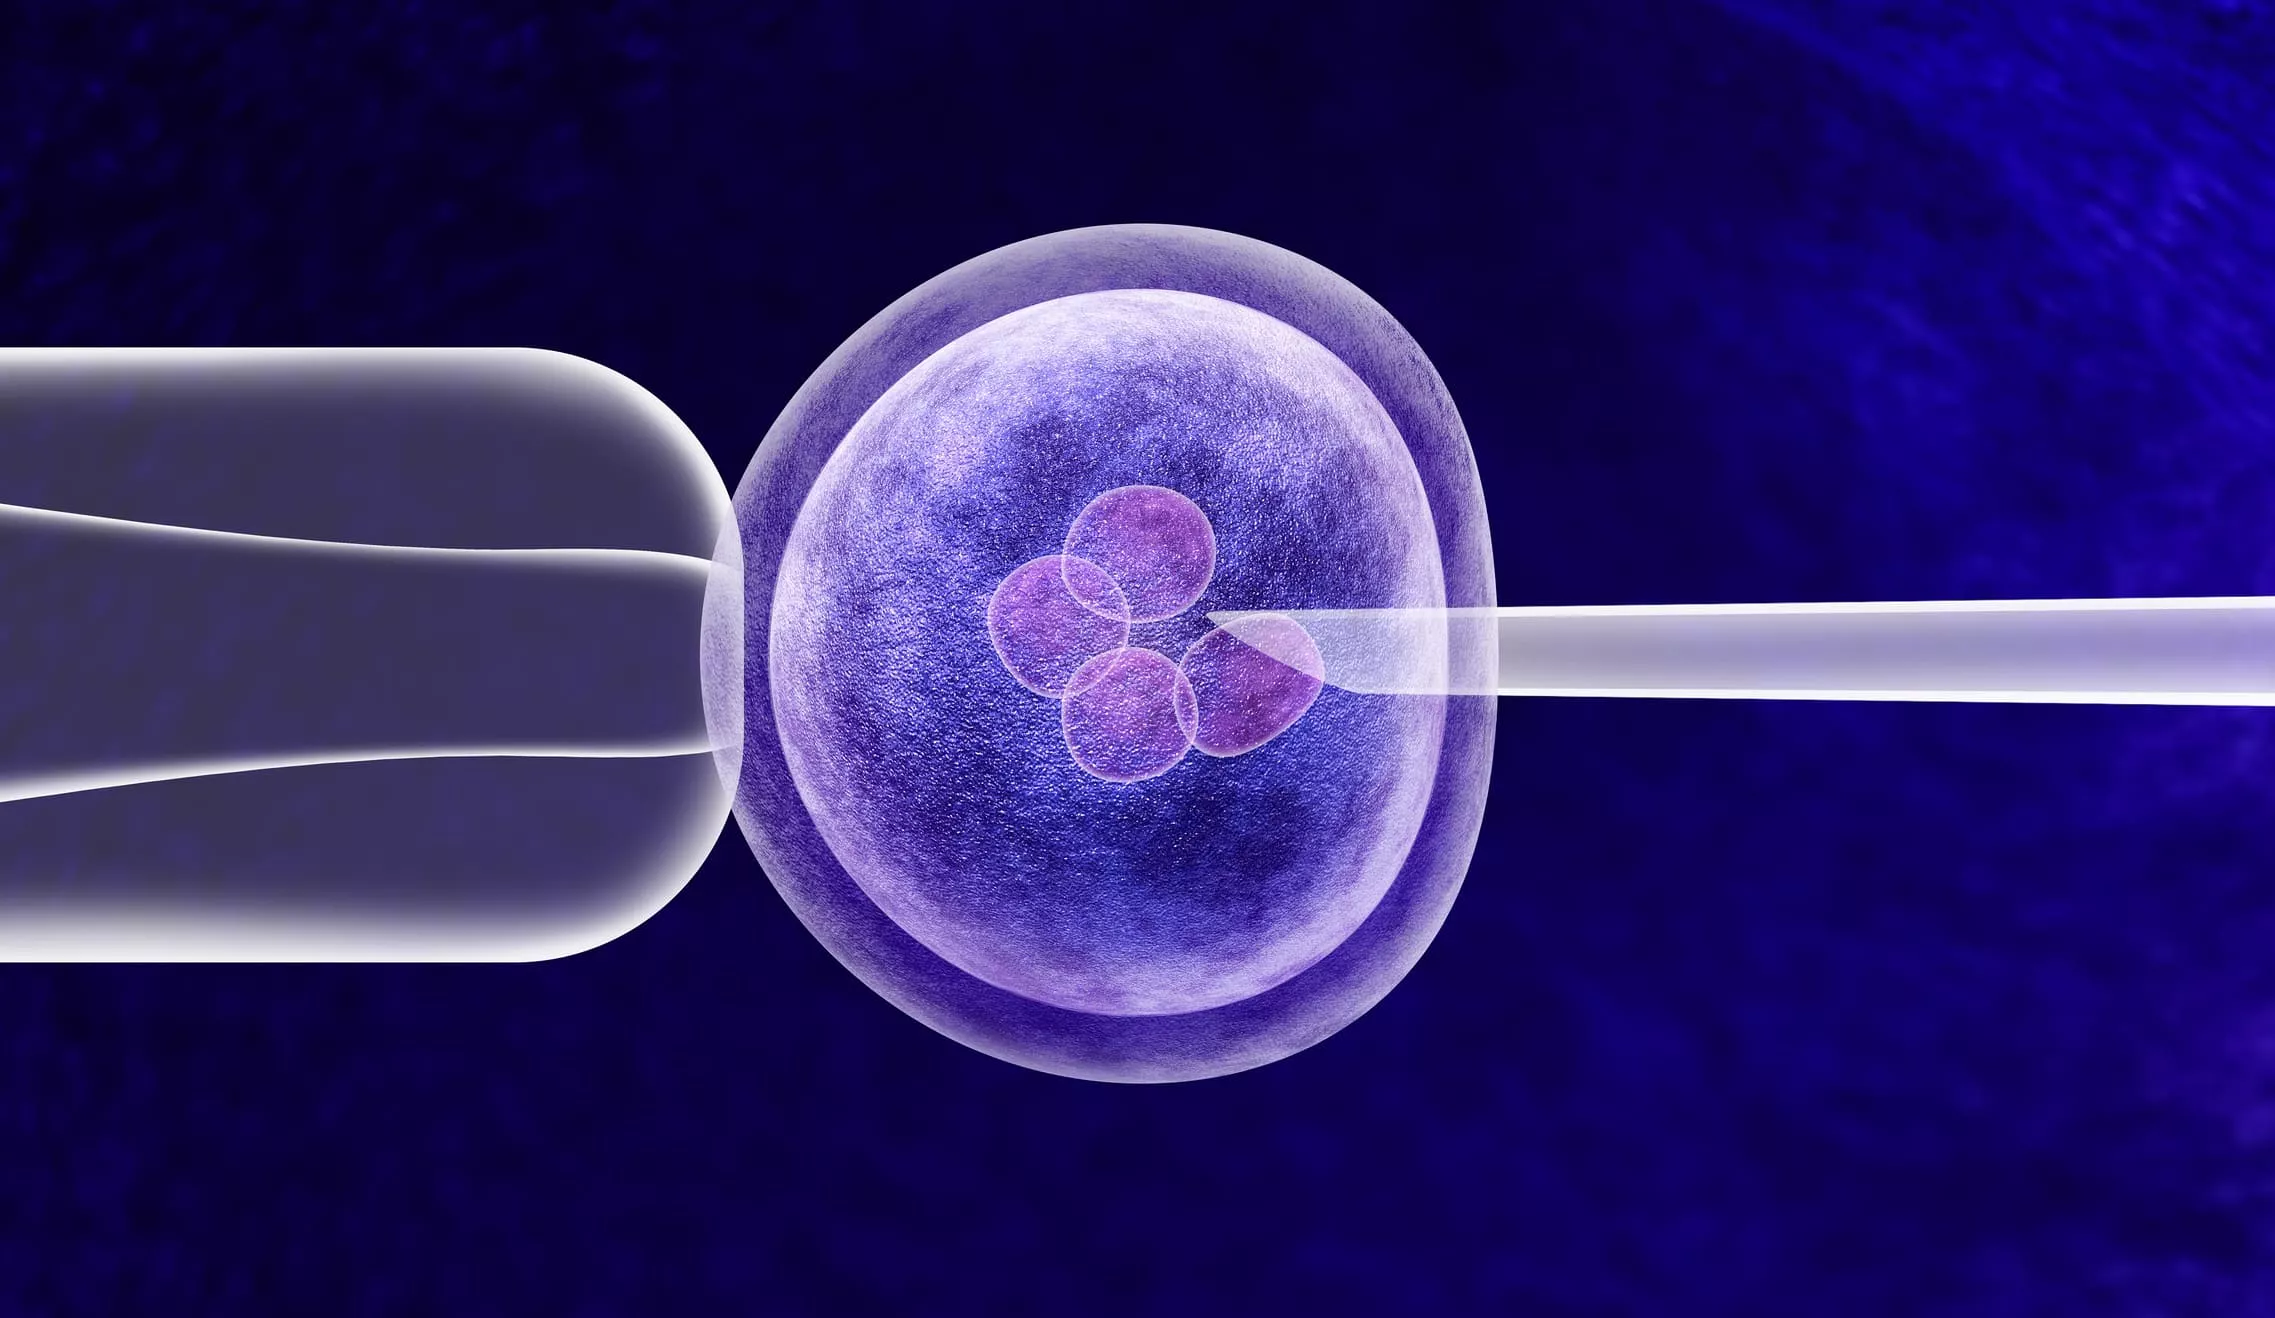 New, stricter regulations for IVF laboratories